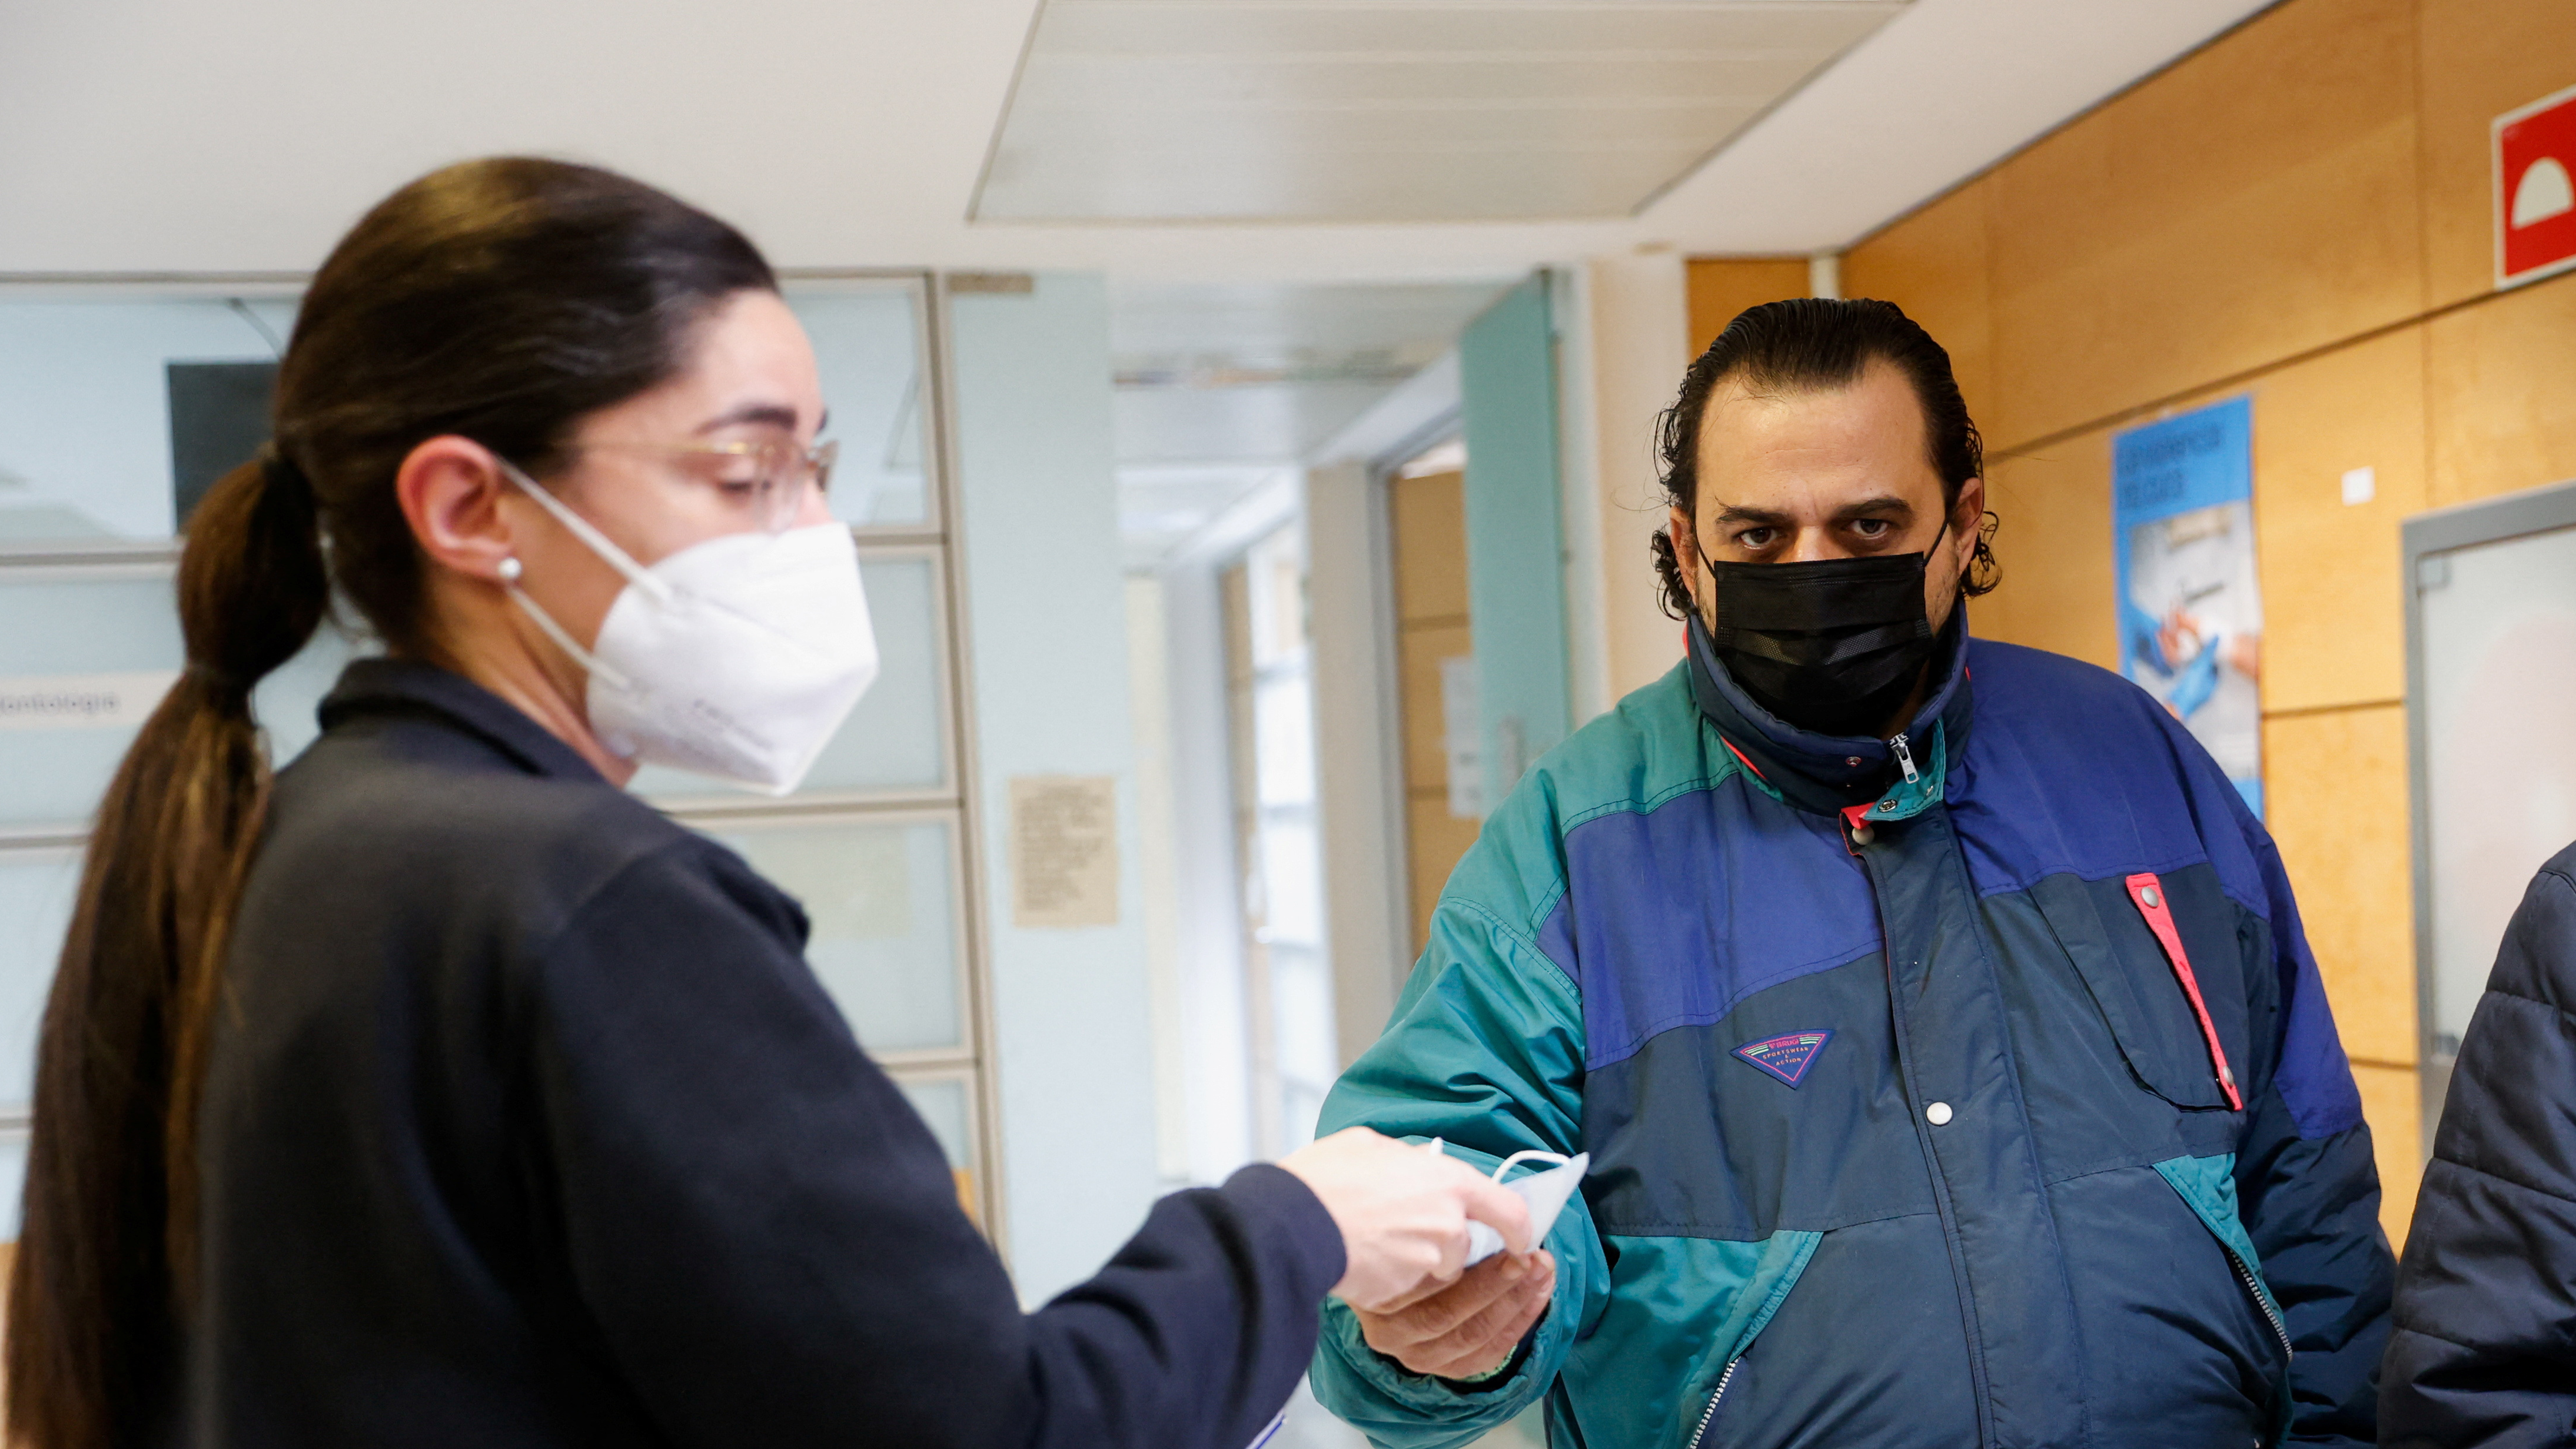 Spain's health ministry says it will be mandatory for masks to be worn in hospitals and other healthcare facilities following an outbreak of flu. /Eva Manez/Reuters.